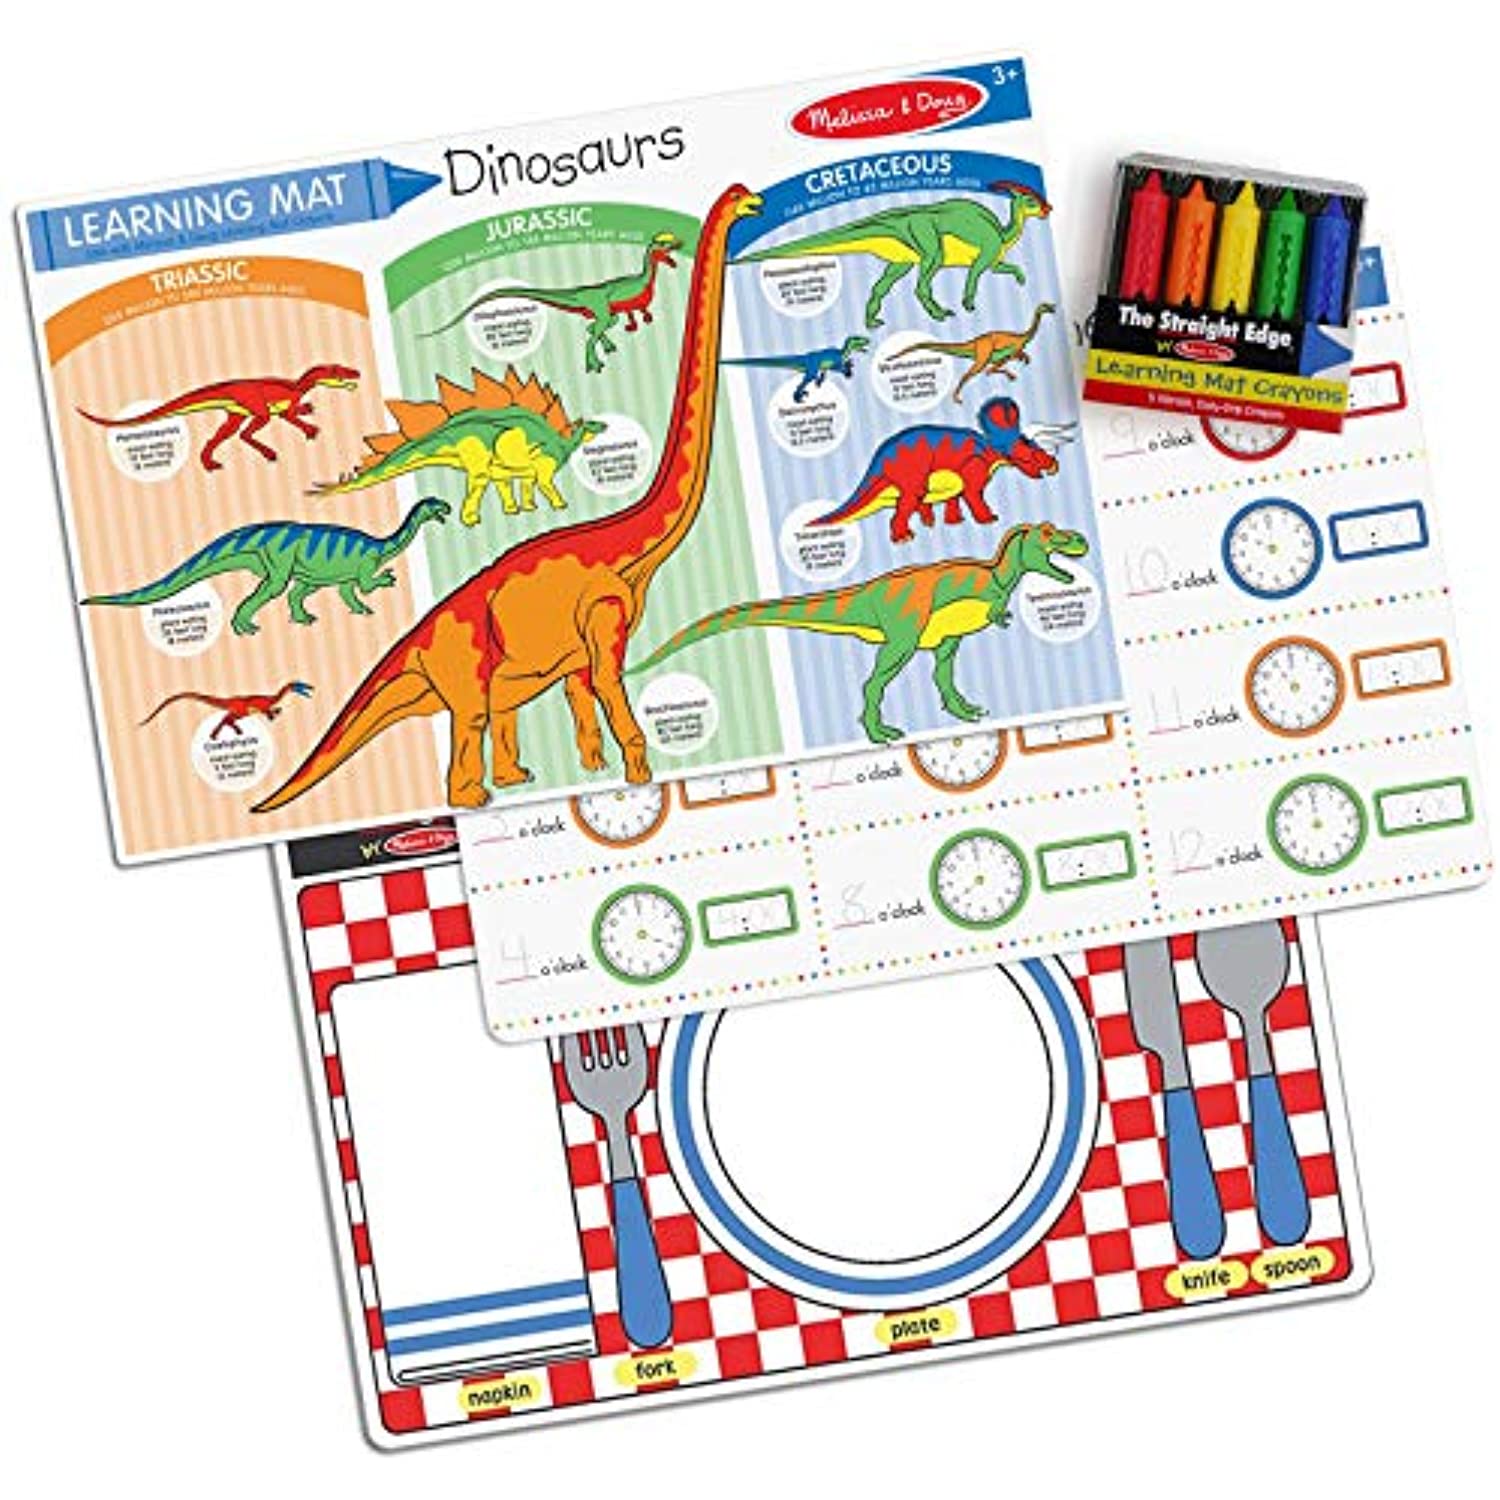 Melissa & Doug Basic Knowledge I w/ Crayon Bundle for Ages 3 to 6: Telling Time, Set The Table, Dinosaurs (#BAS1-MAT)